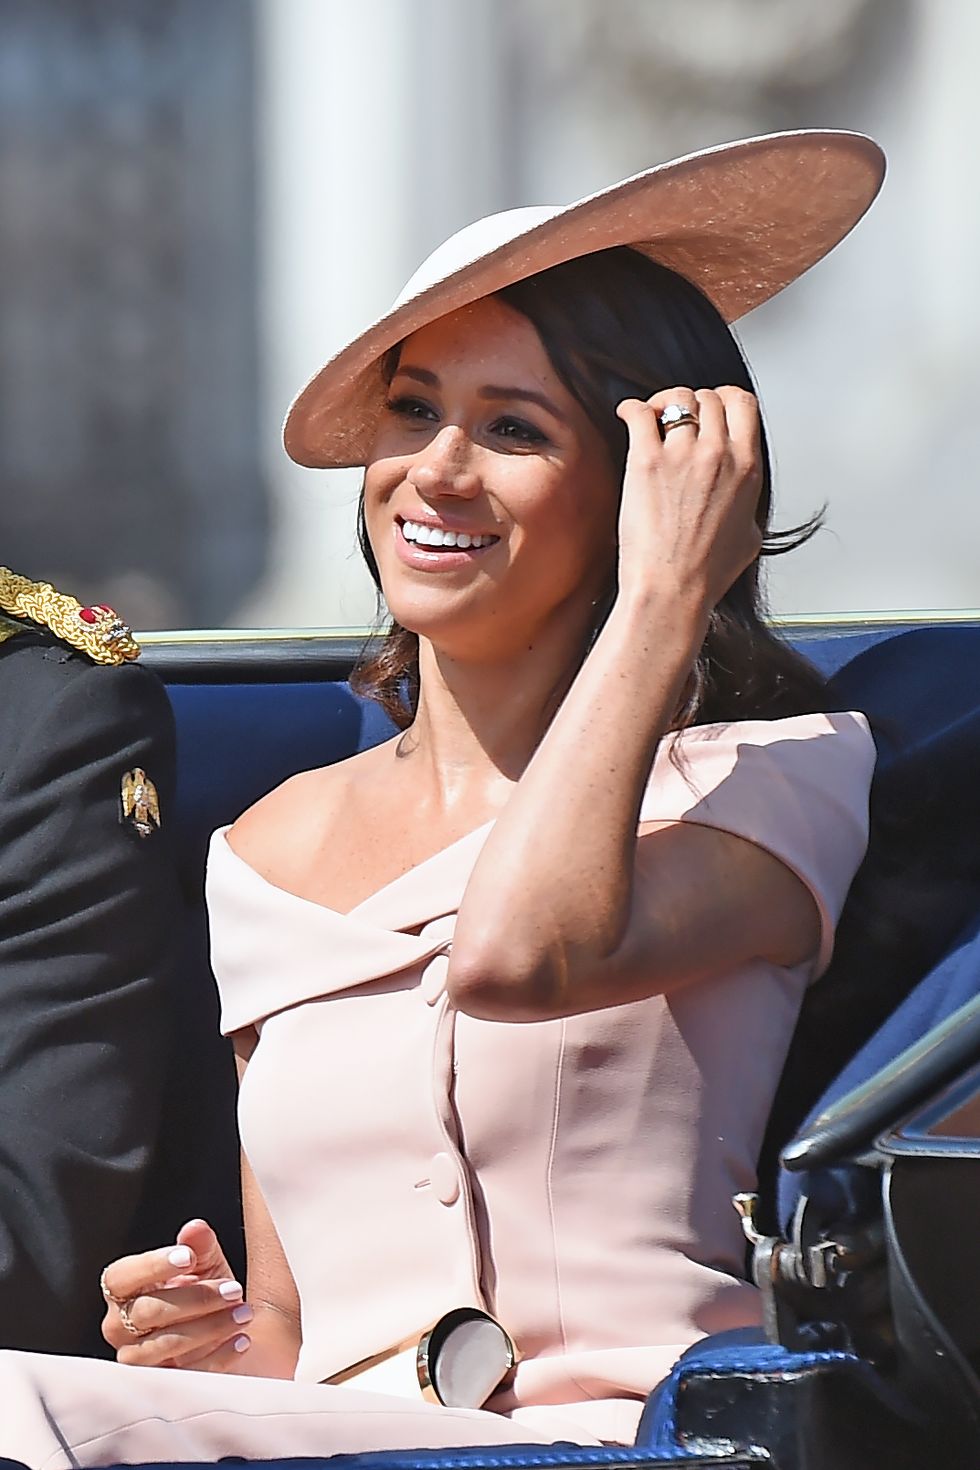 meghan duchess of sussex travel sin an open carriage to the news photo 970627080 1567118159 - 10 ﻿Meghan Markle Halloween Costume Ideas for the Royally Obsessed